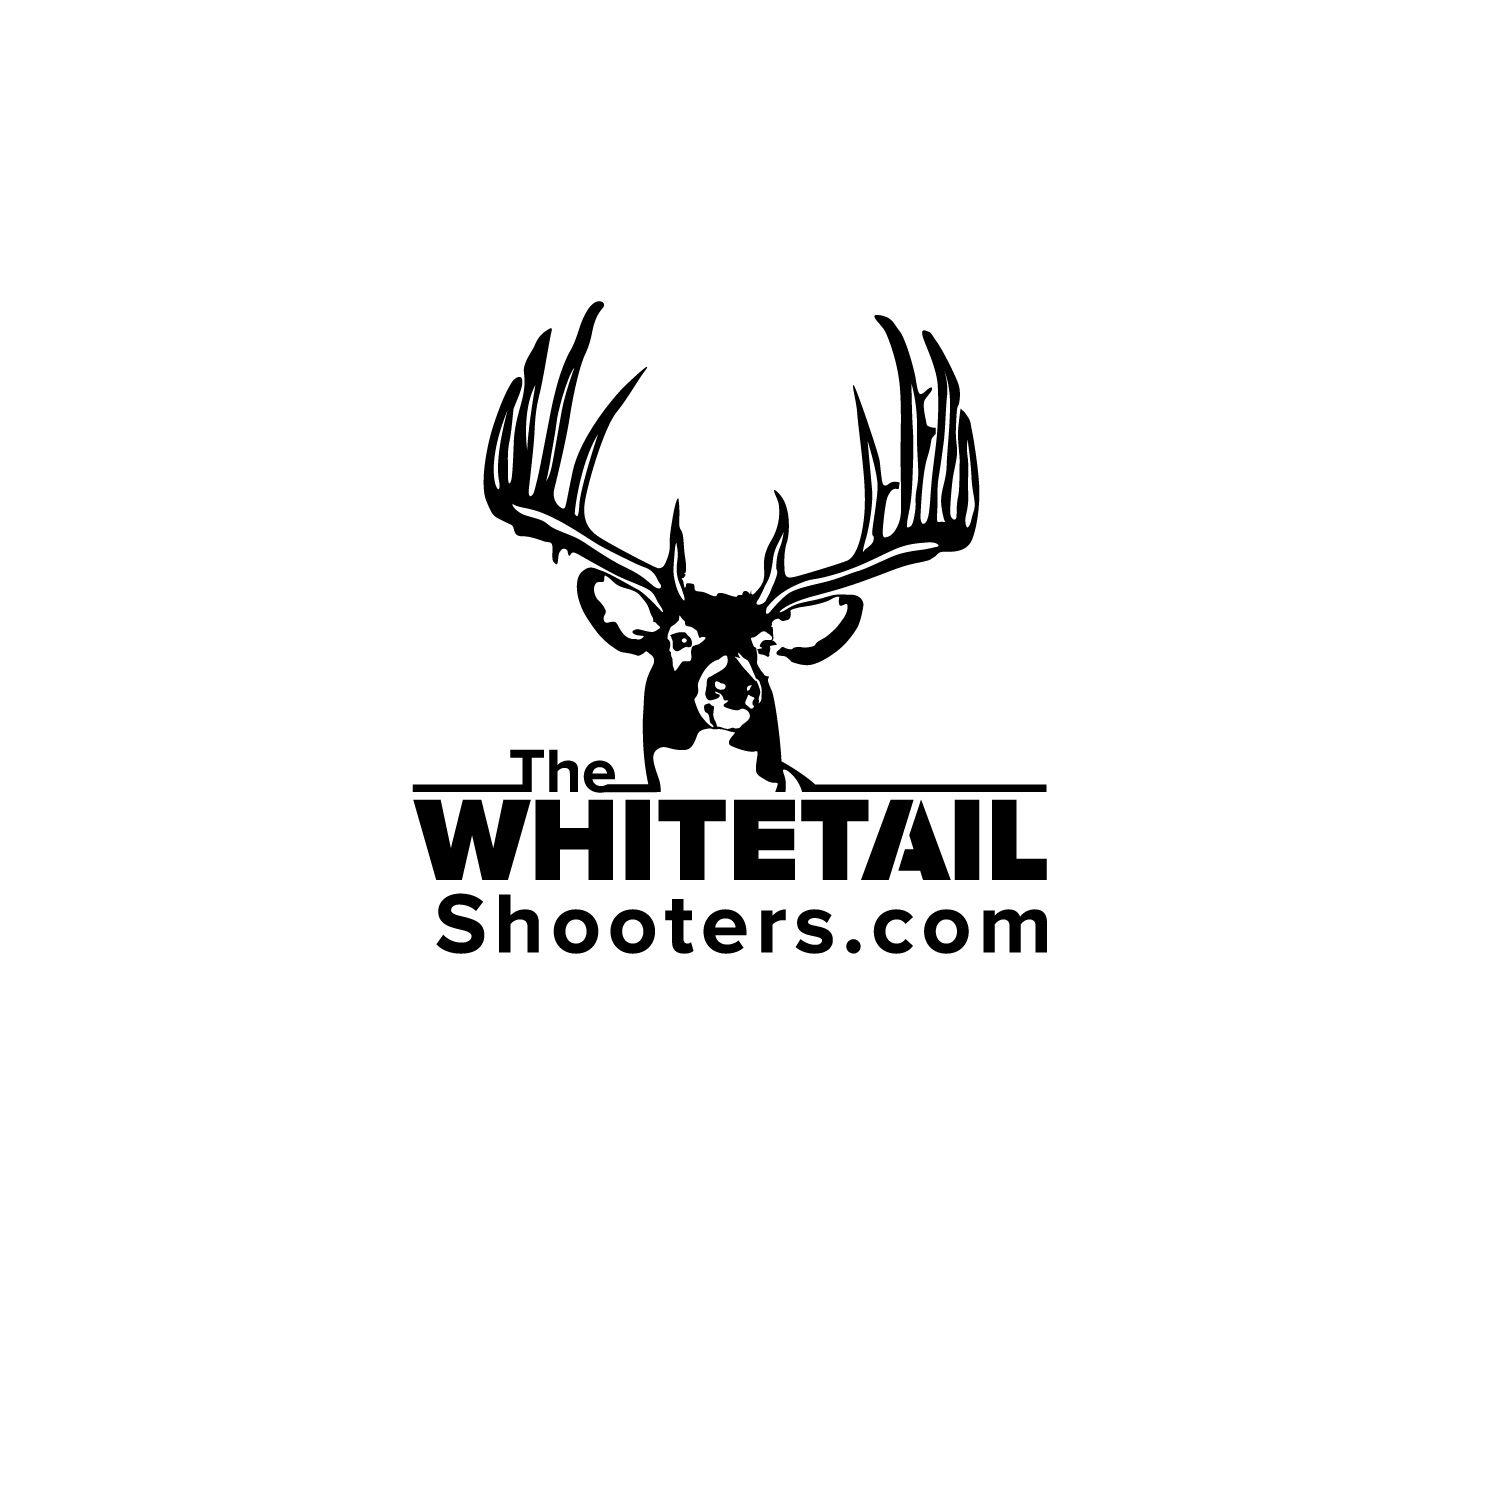 Whitetail Logo - Bold, Serious, Hunting Logo Design for The Whitetail Shooters